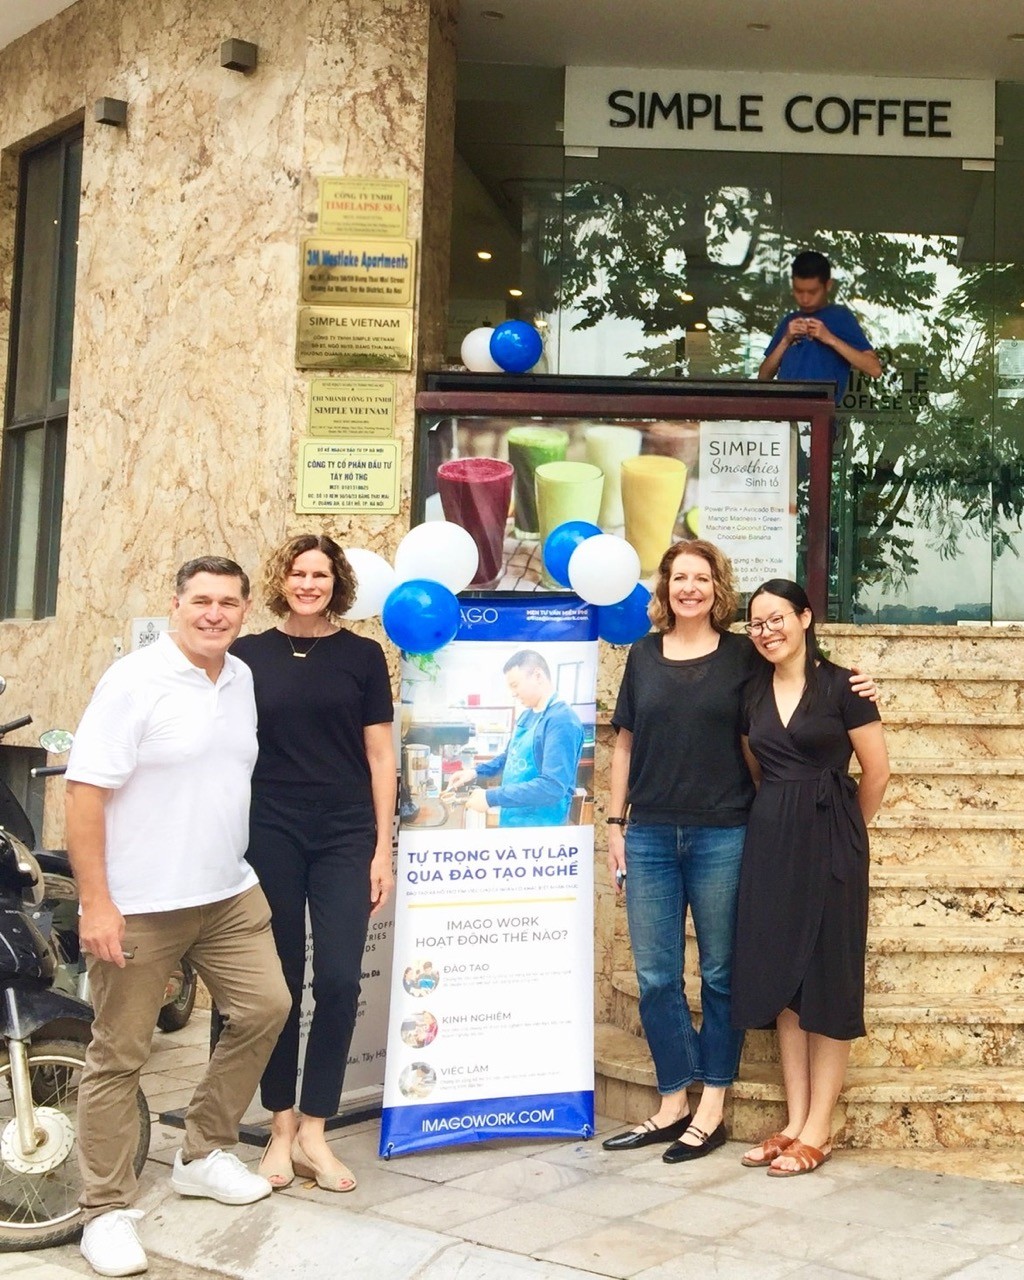 Expat Spotlight: Julie Schumacher, Michelle and Mike Beard - Brewing Inclusive Workplaces in Hanoi